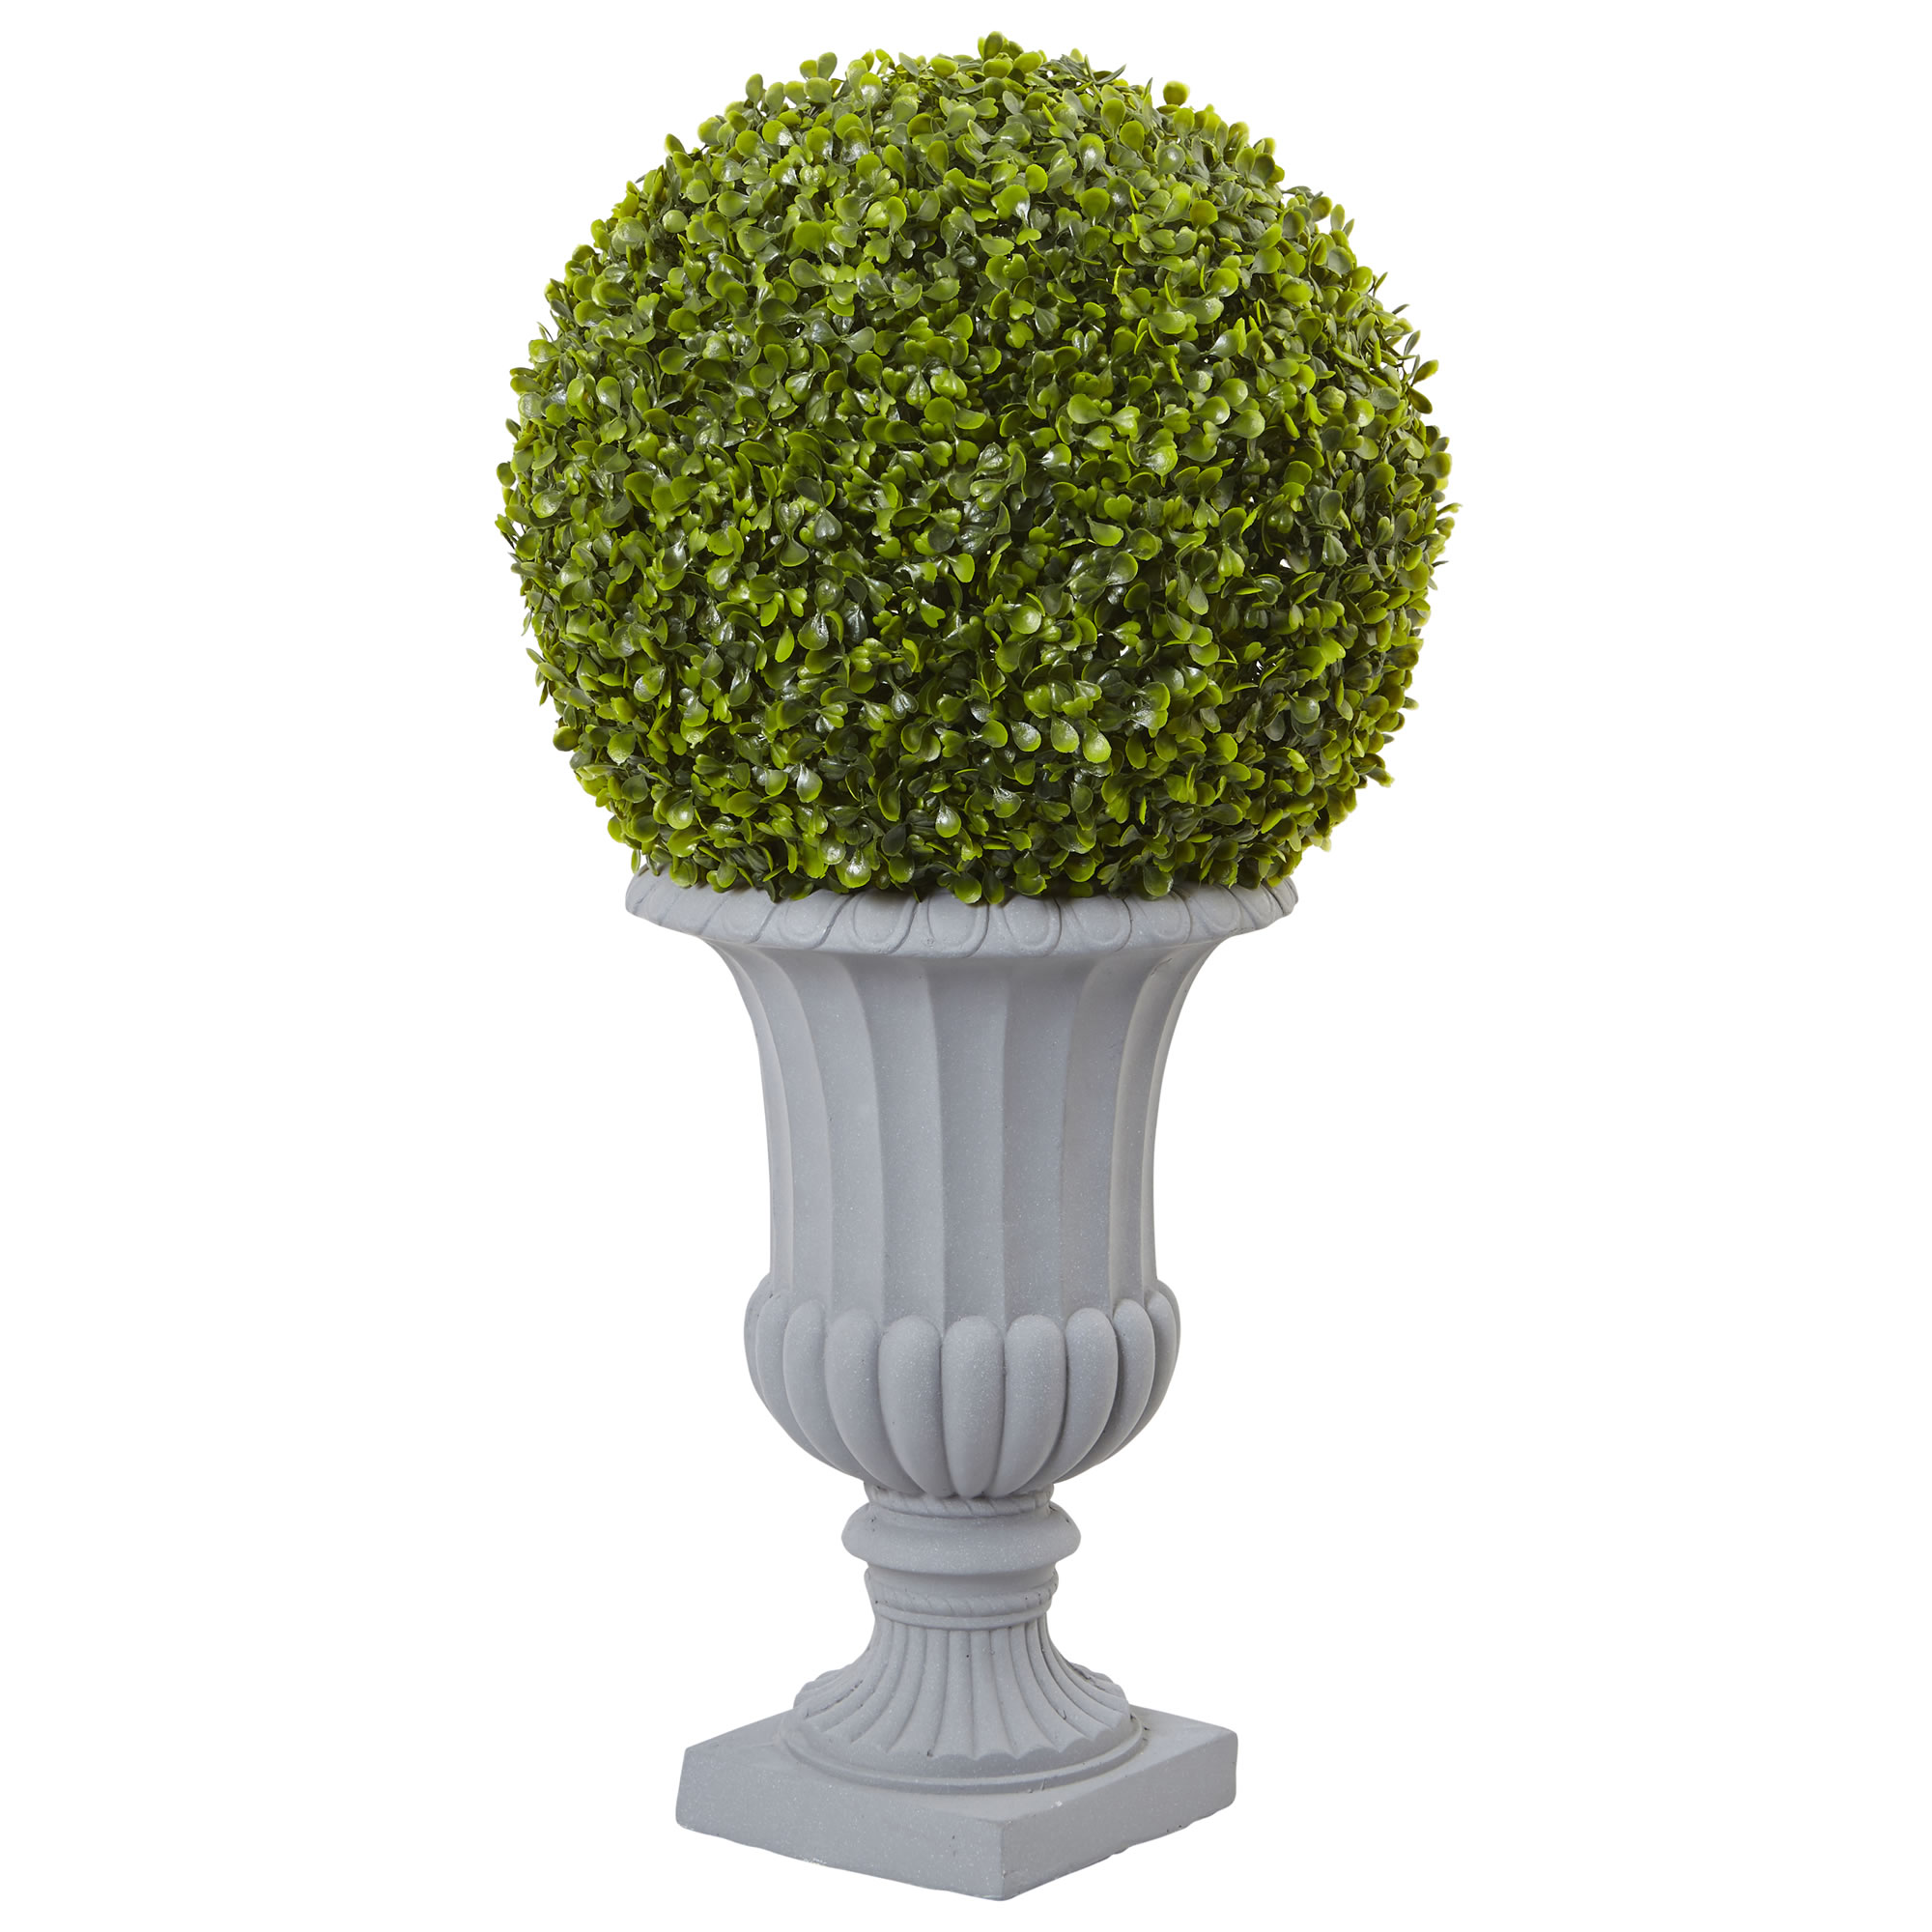 30 Inch Boxwood Topiary In Decorative Urn: Uv Protected